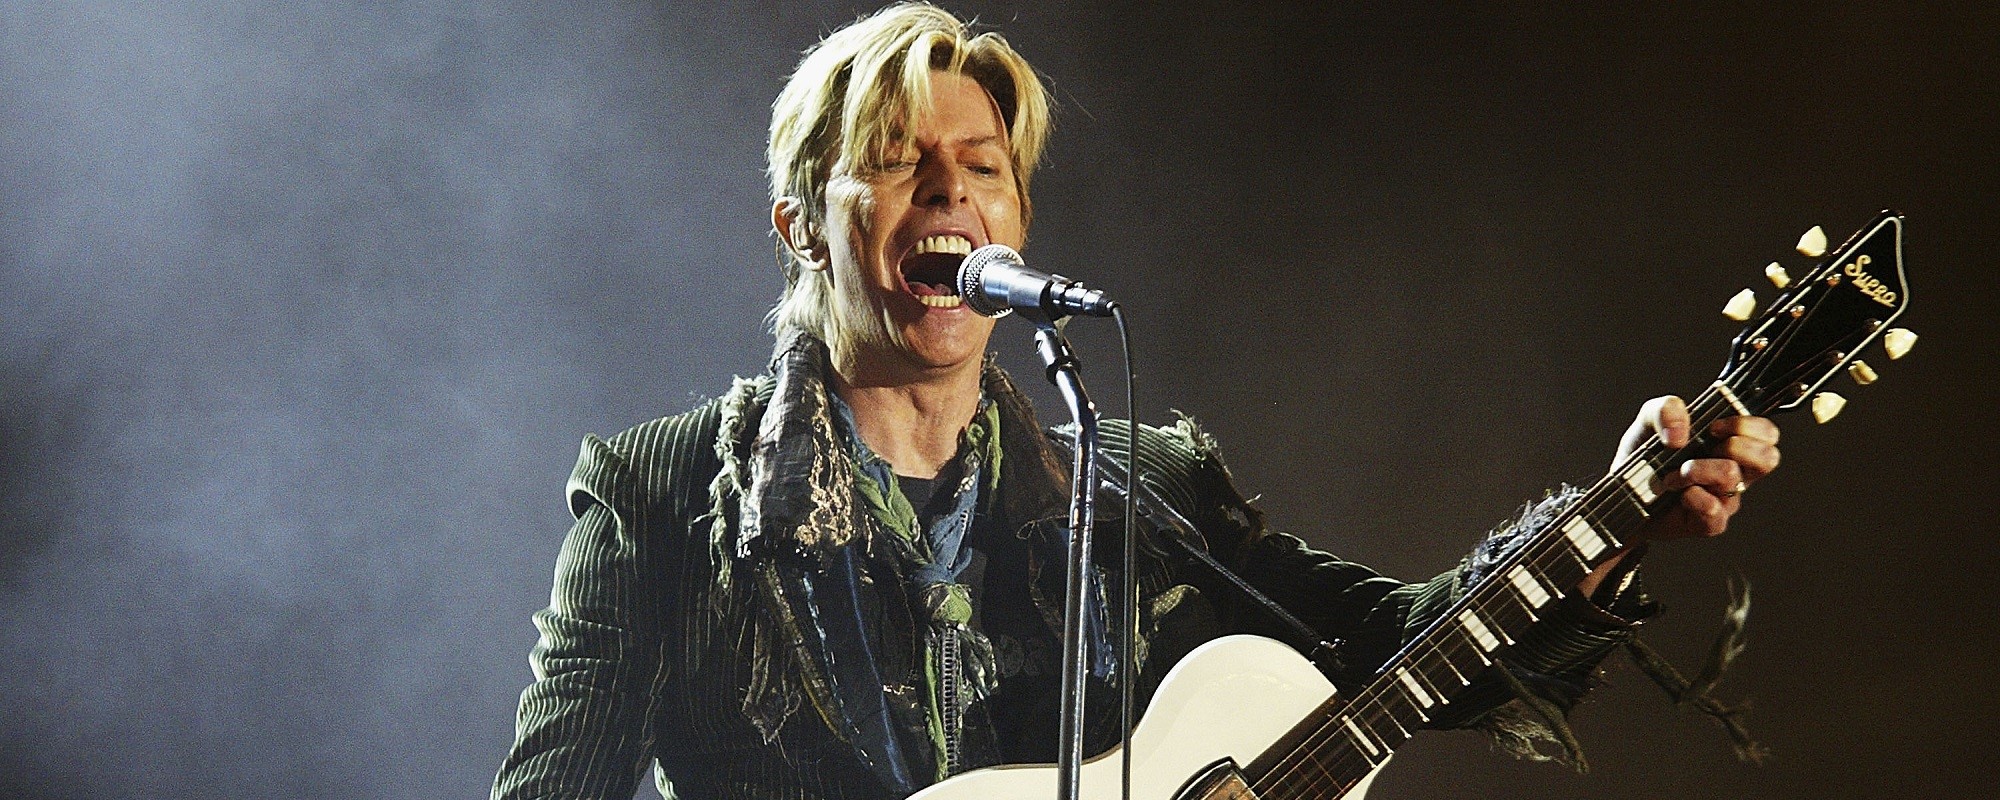 20 Years Ago Today: David Bowie Played His Final Fill-Length Concert at a German Festival